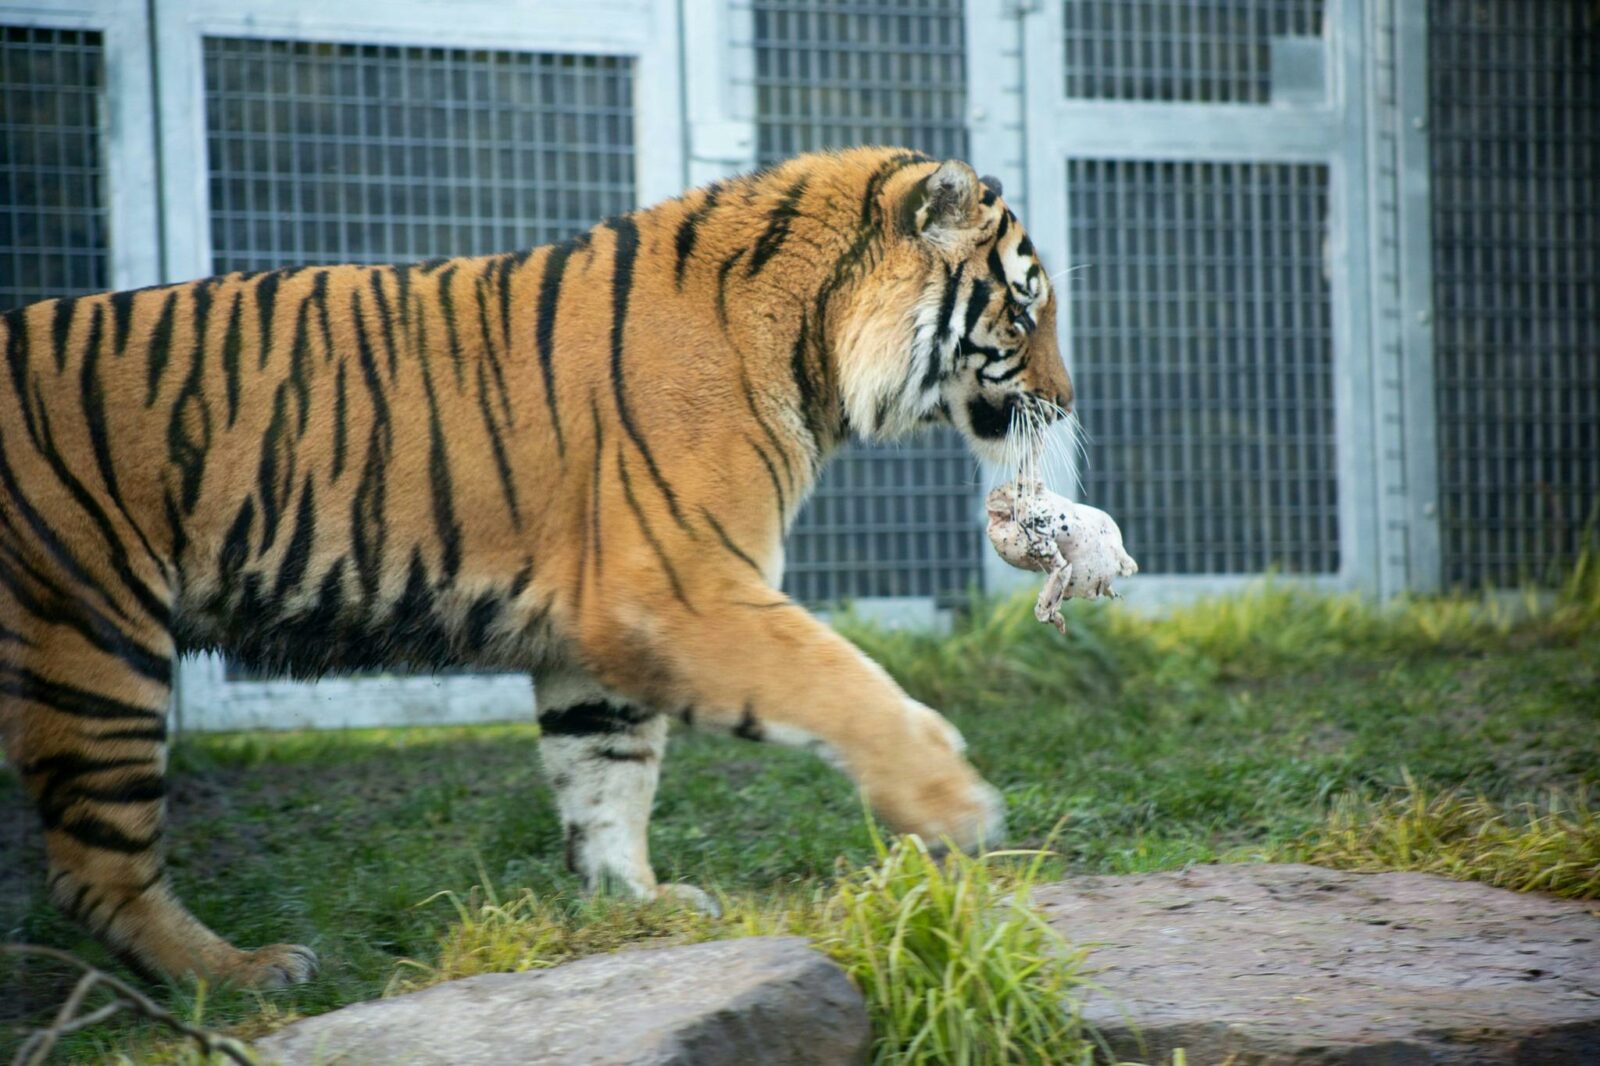 Tiger carrying food